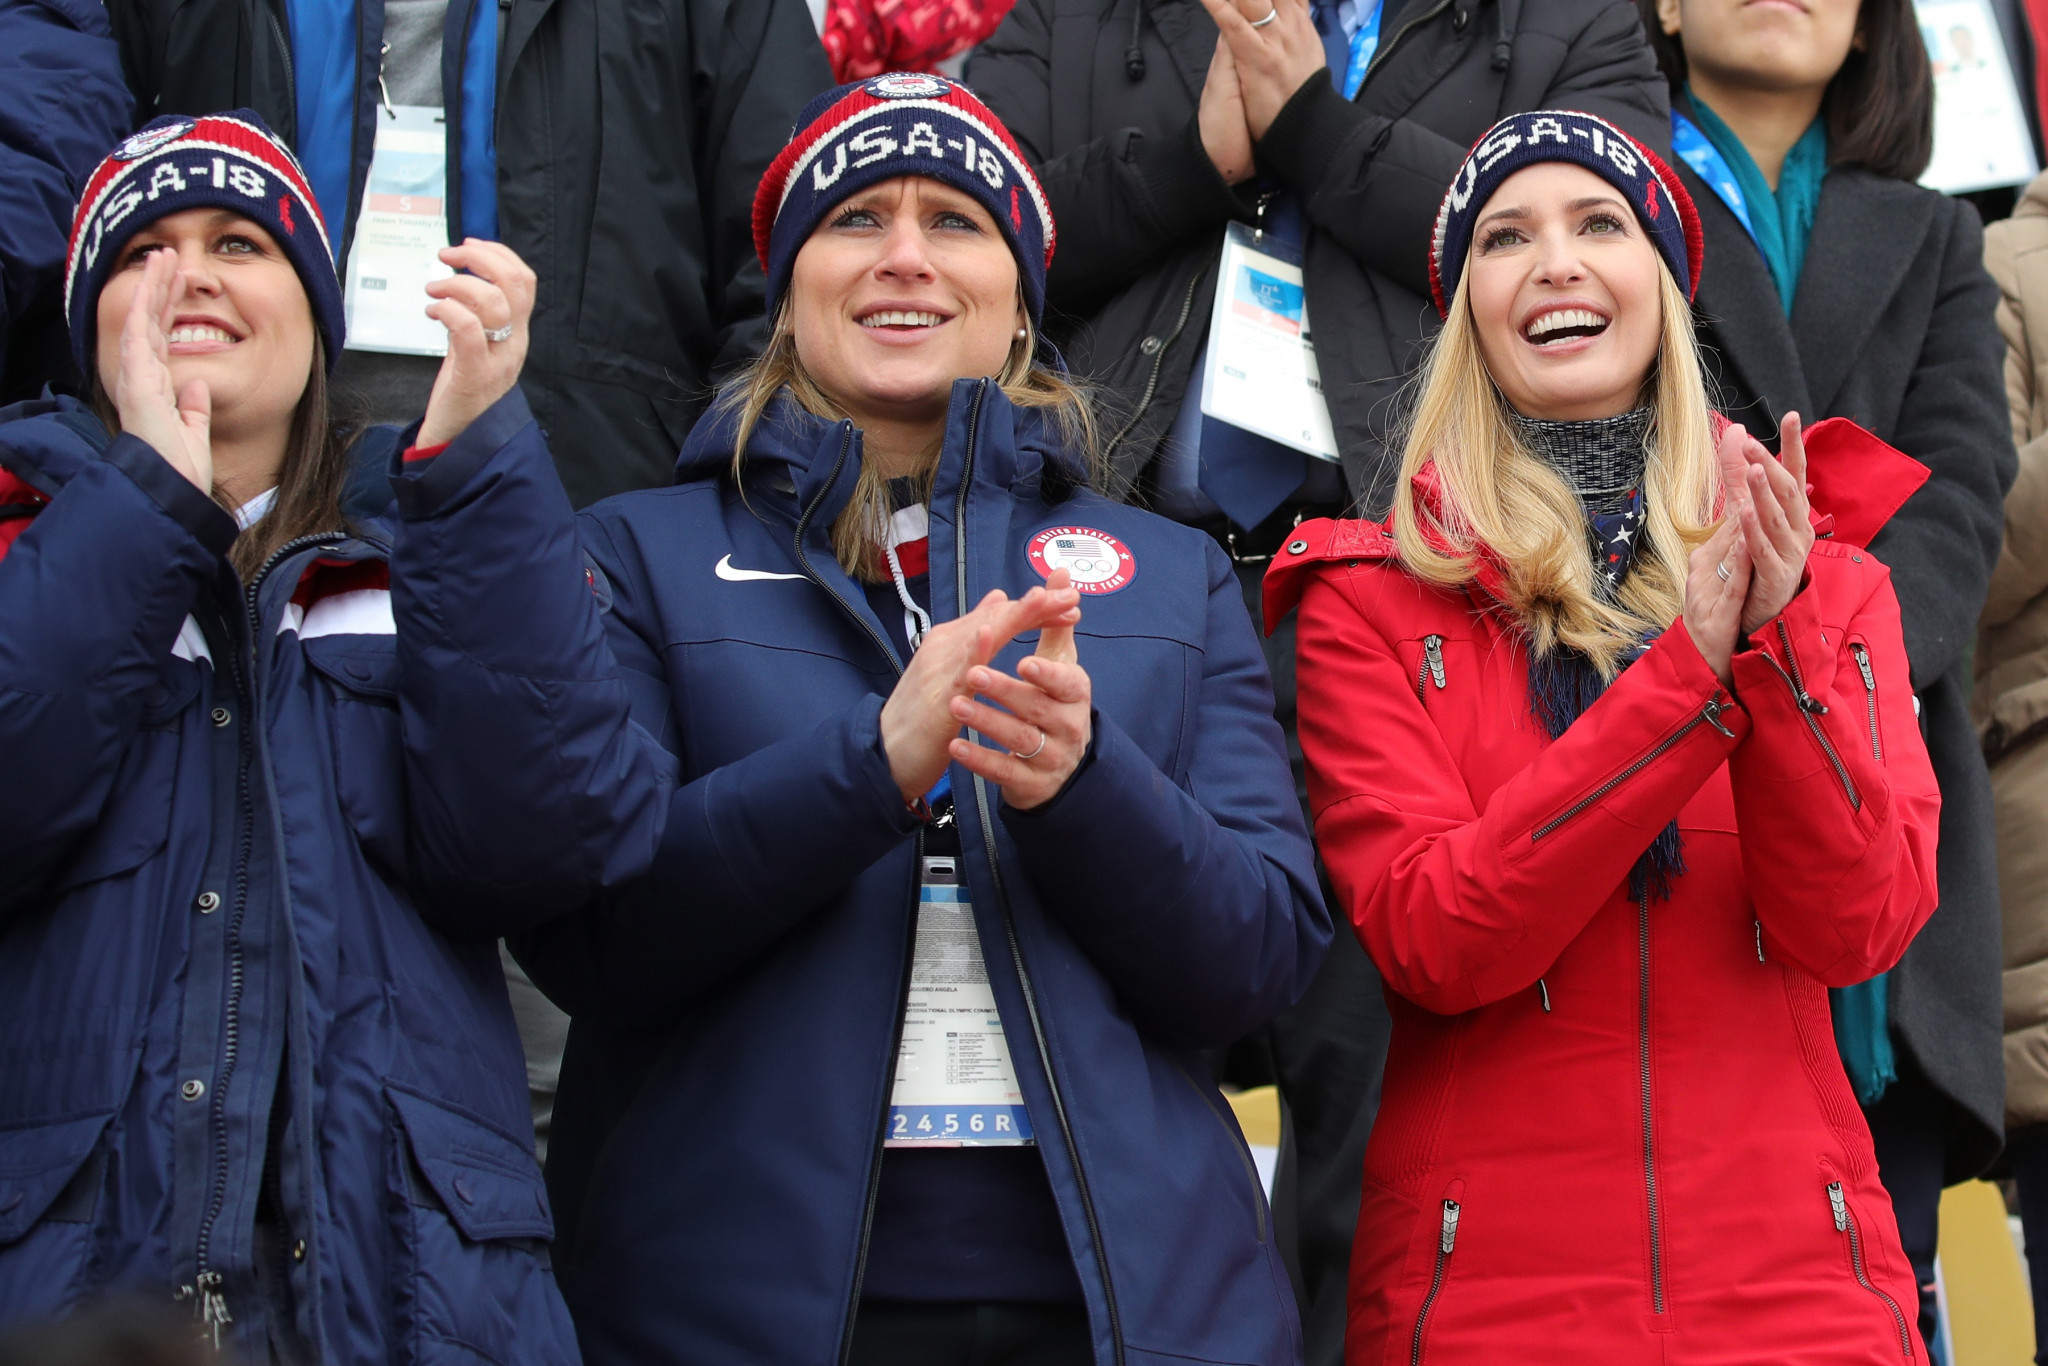 Angela Ruggiero, pictured centre with United States President Donald Trump's daughter Ivanka, right, during the Pyeongchang 2018 Winter Olympic Games, is considered a leading figure in the sports world ©Getty Images